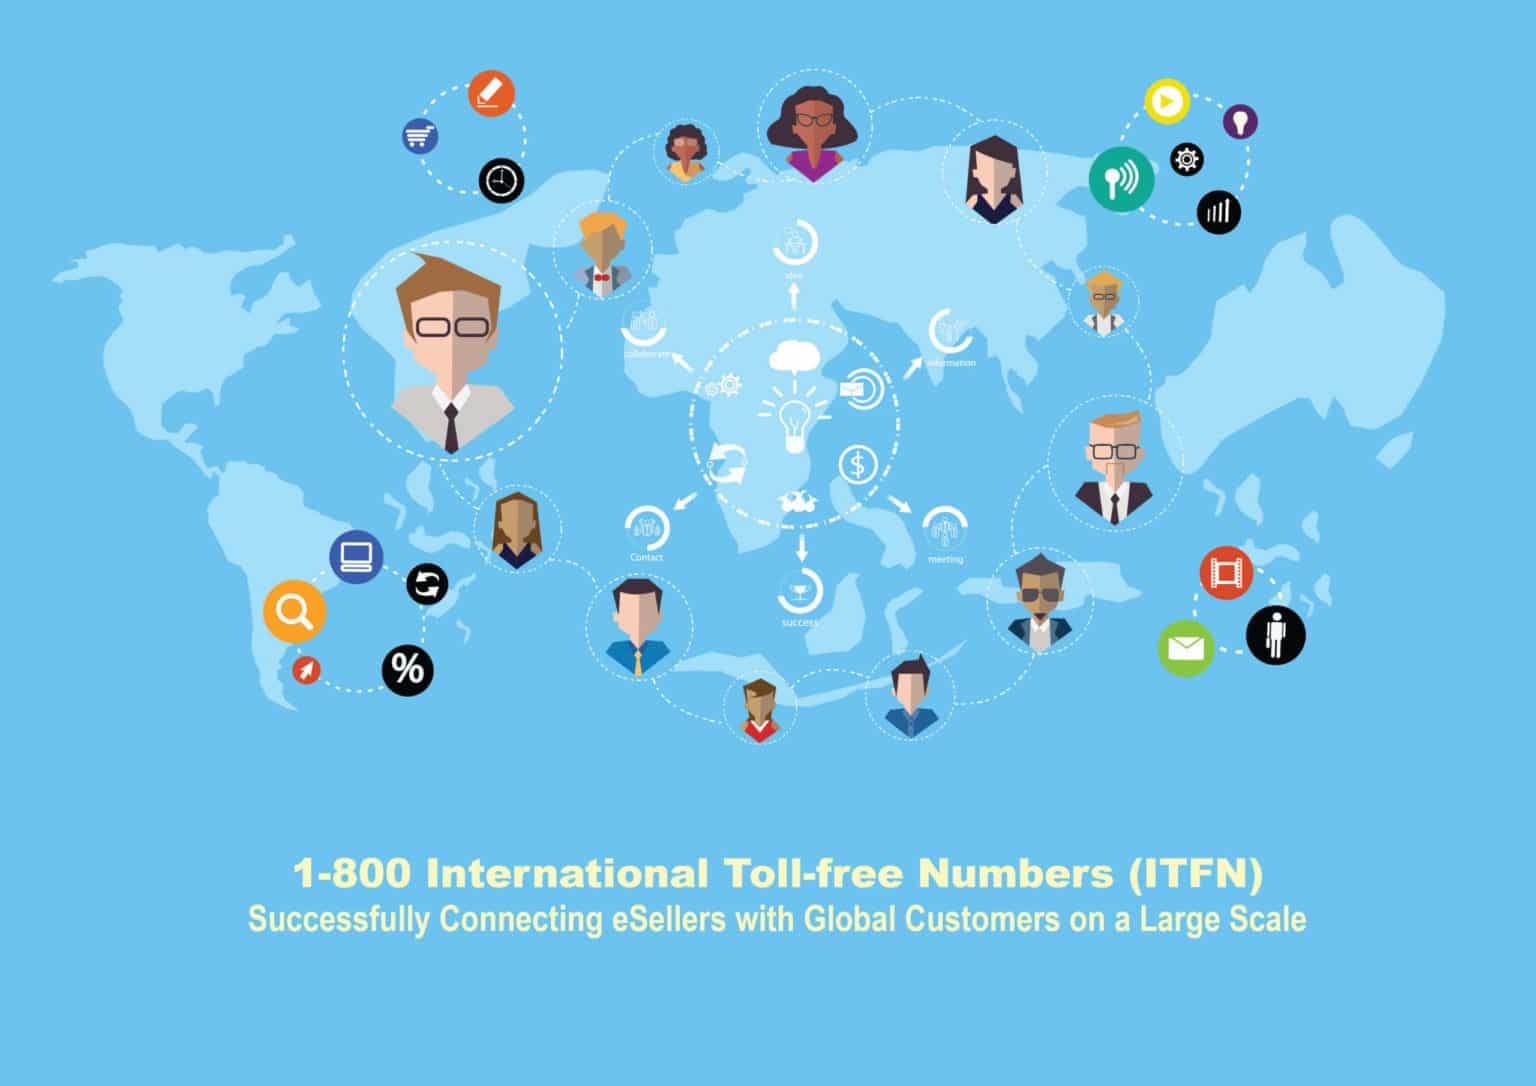 A blue background picture showing a world map demonstrates that 1-800 international toll-free numbers (ITFN) connect eSellers with global e-Commerce consumers/customers on a large scale; the world map shows people from around the world.